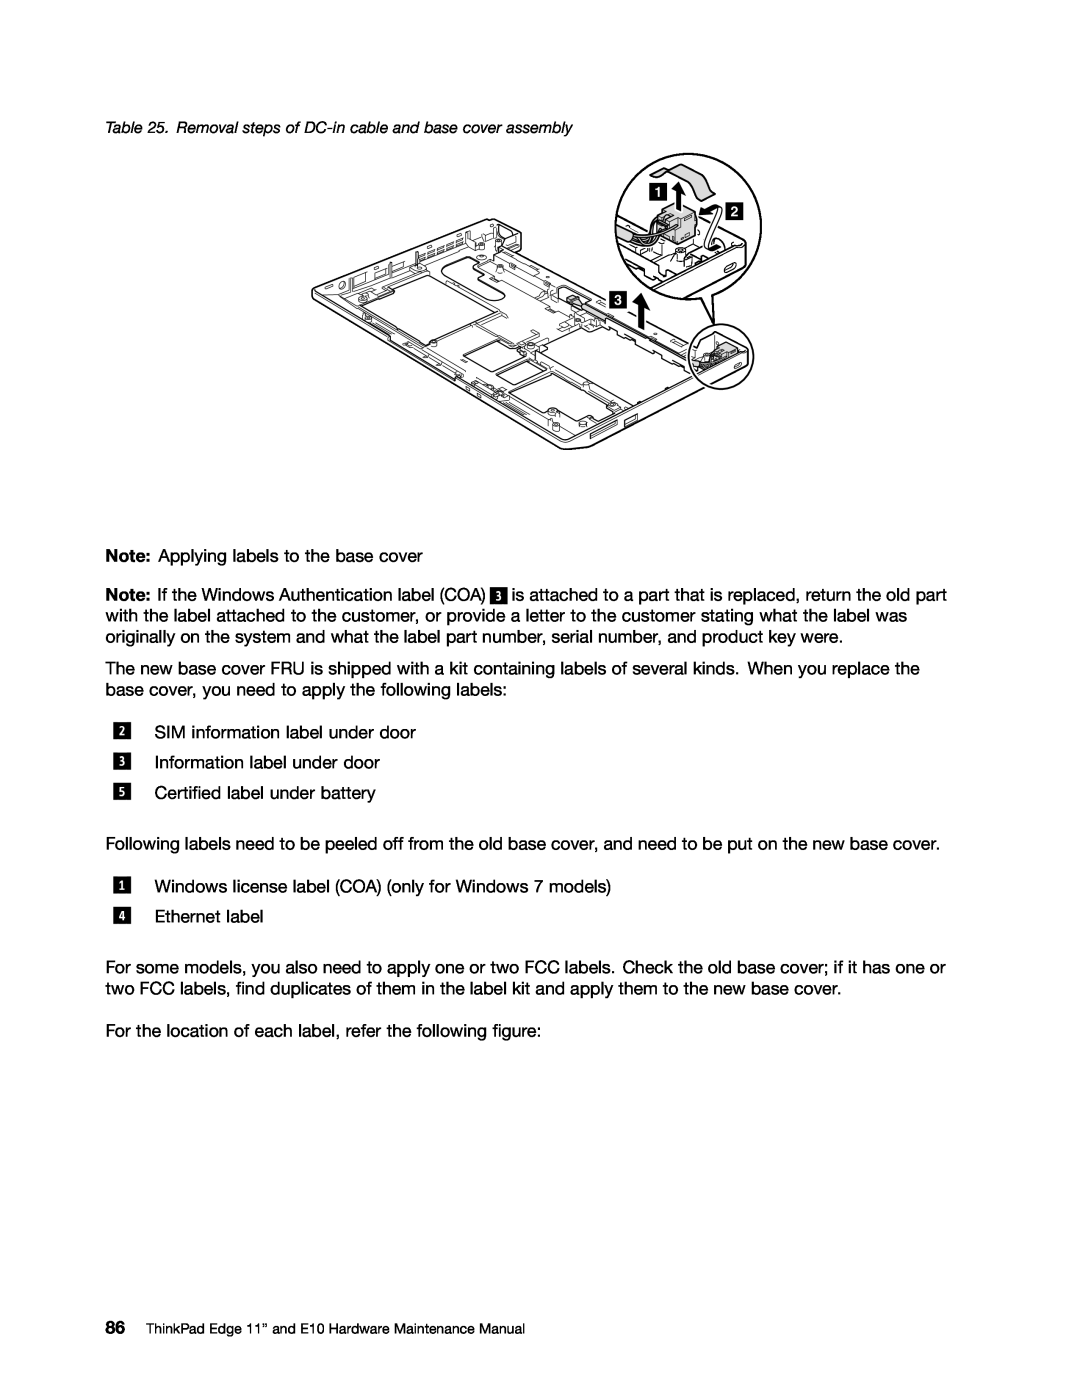 Lenovo E10 manual Note Applying labels to the base cover 